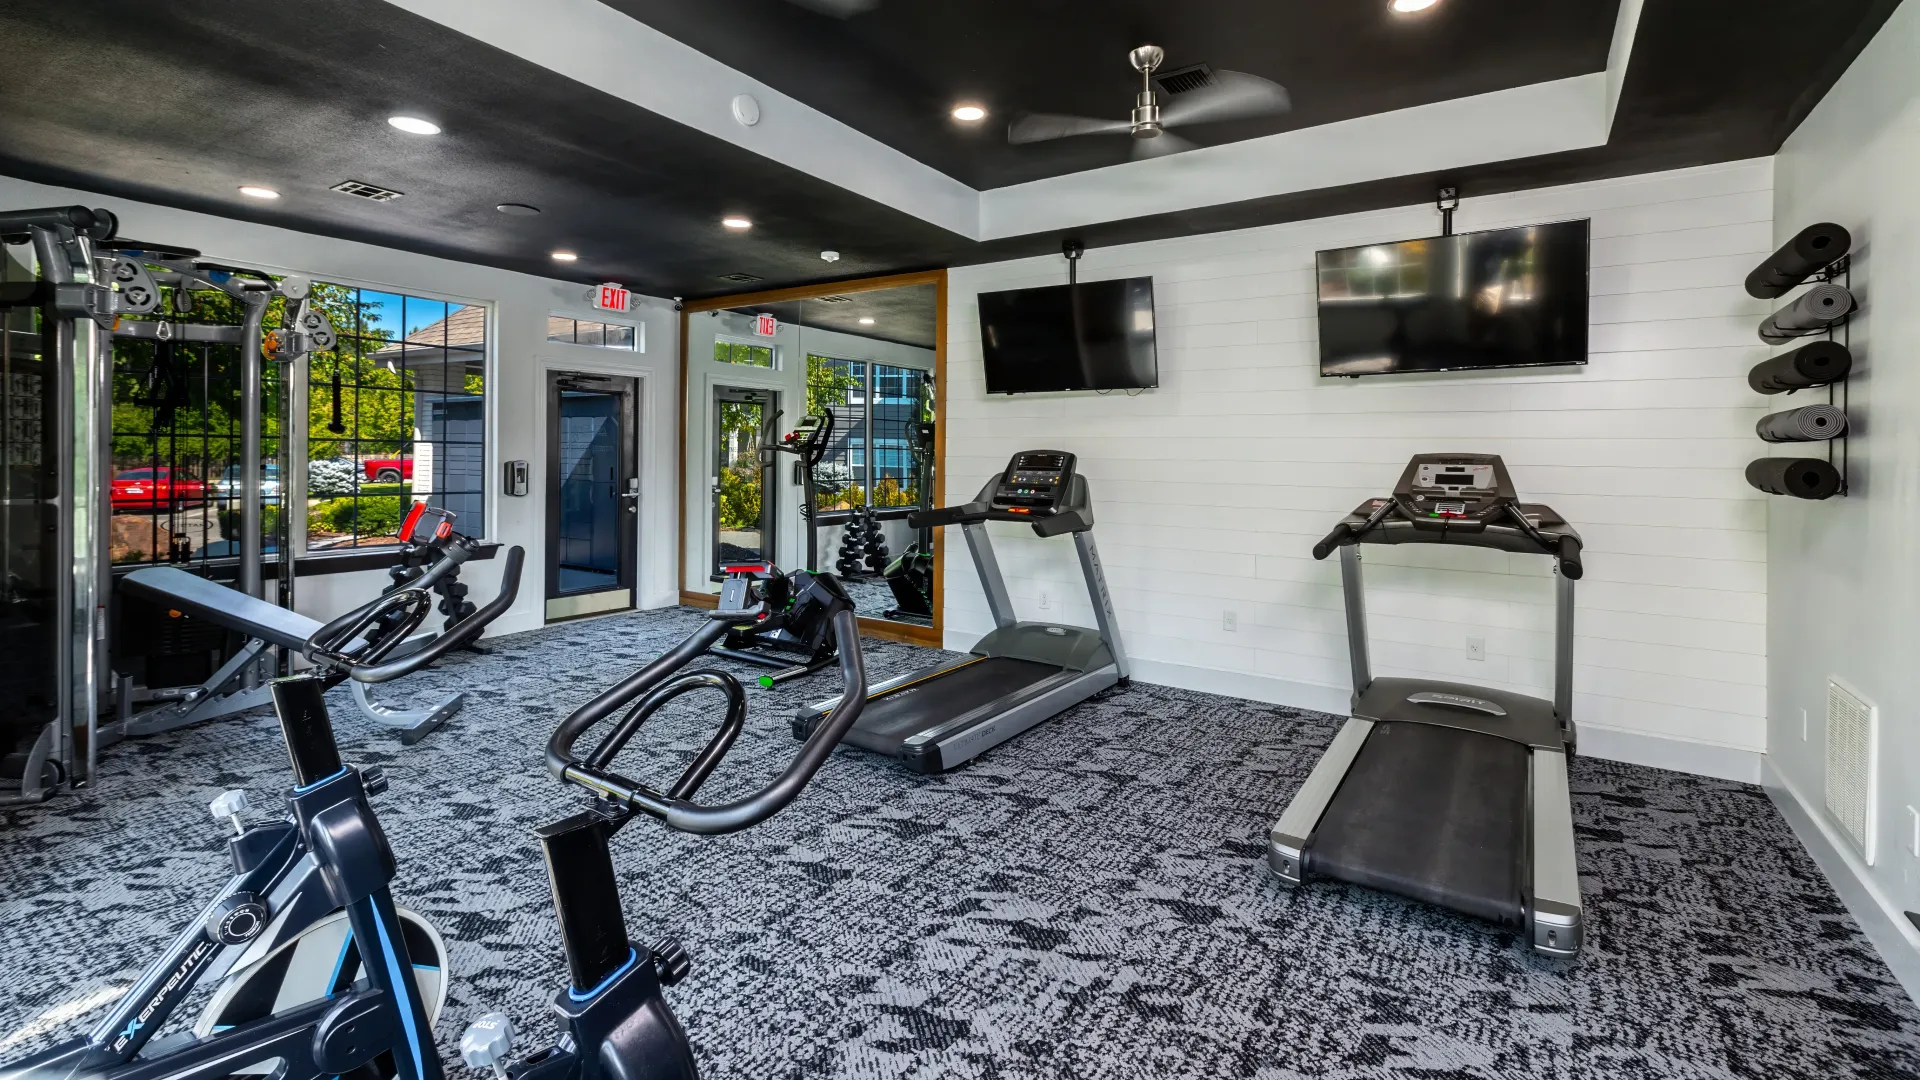 A dynamic view of the fitness center showcasing treadmills, spinning bikes, weight training, and free weights, offering an unmatched resident gym experience.